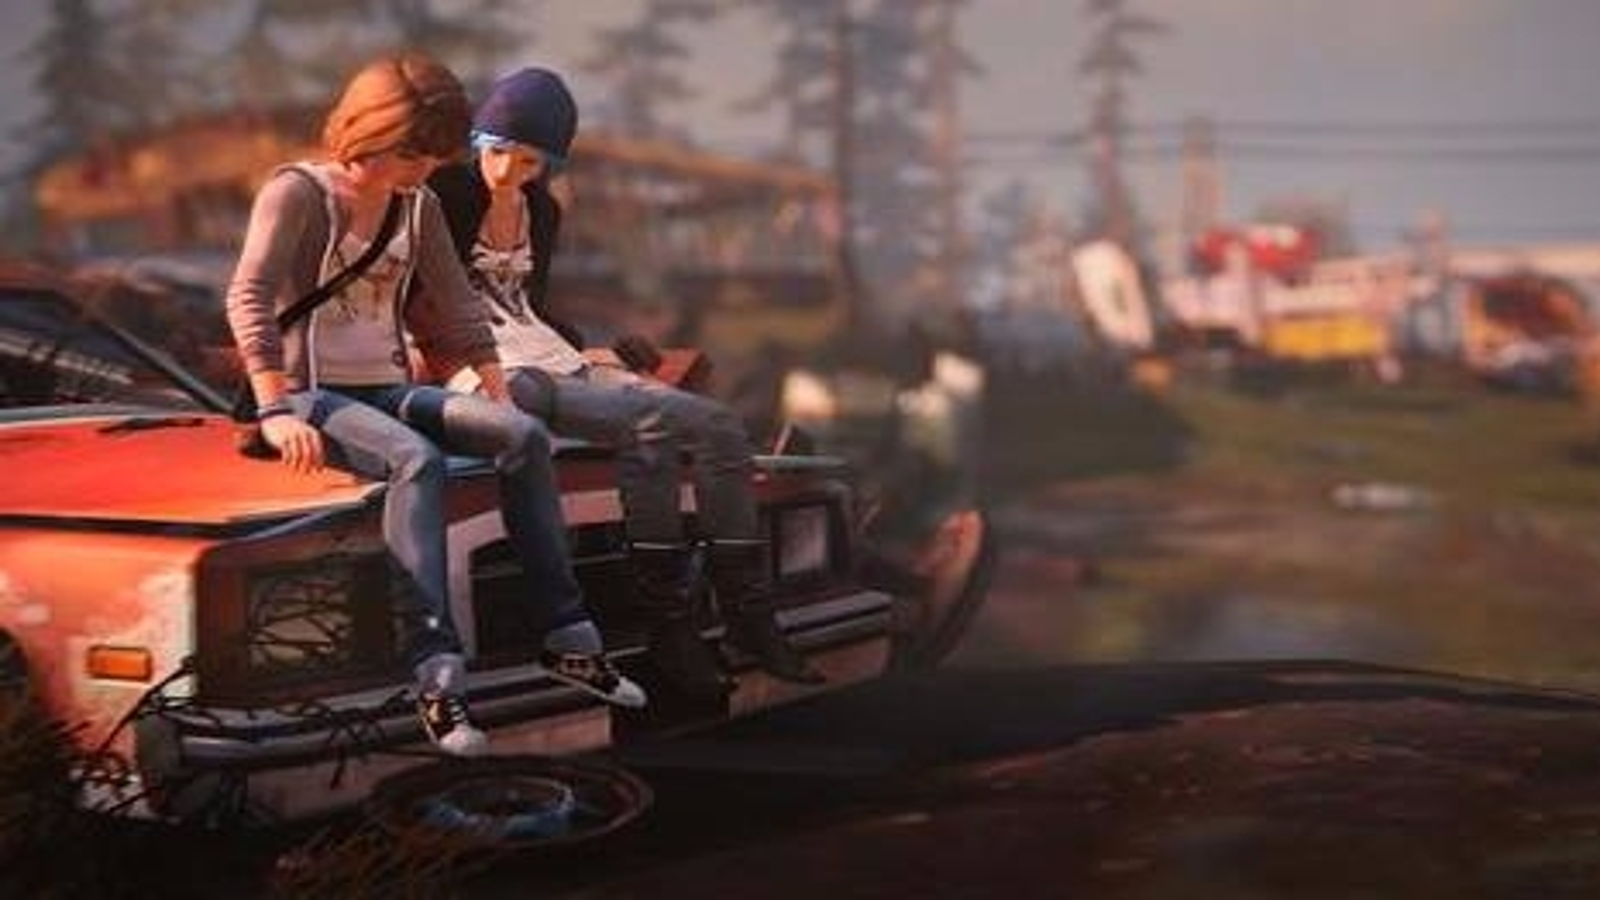 Life is Strange 2' Episode 5 tears down walls for video games: Review